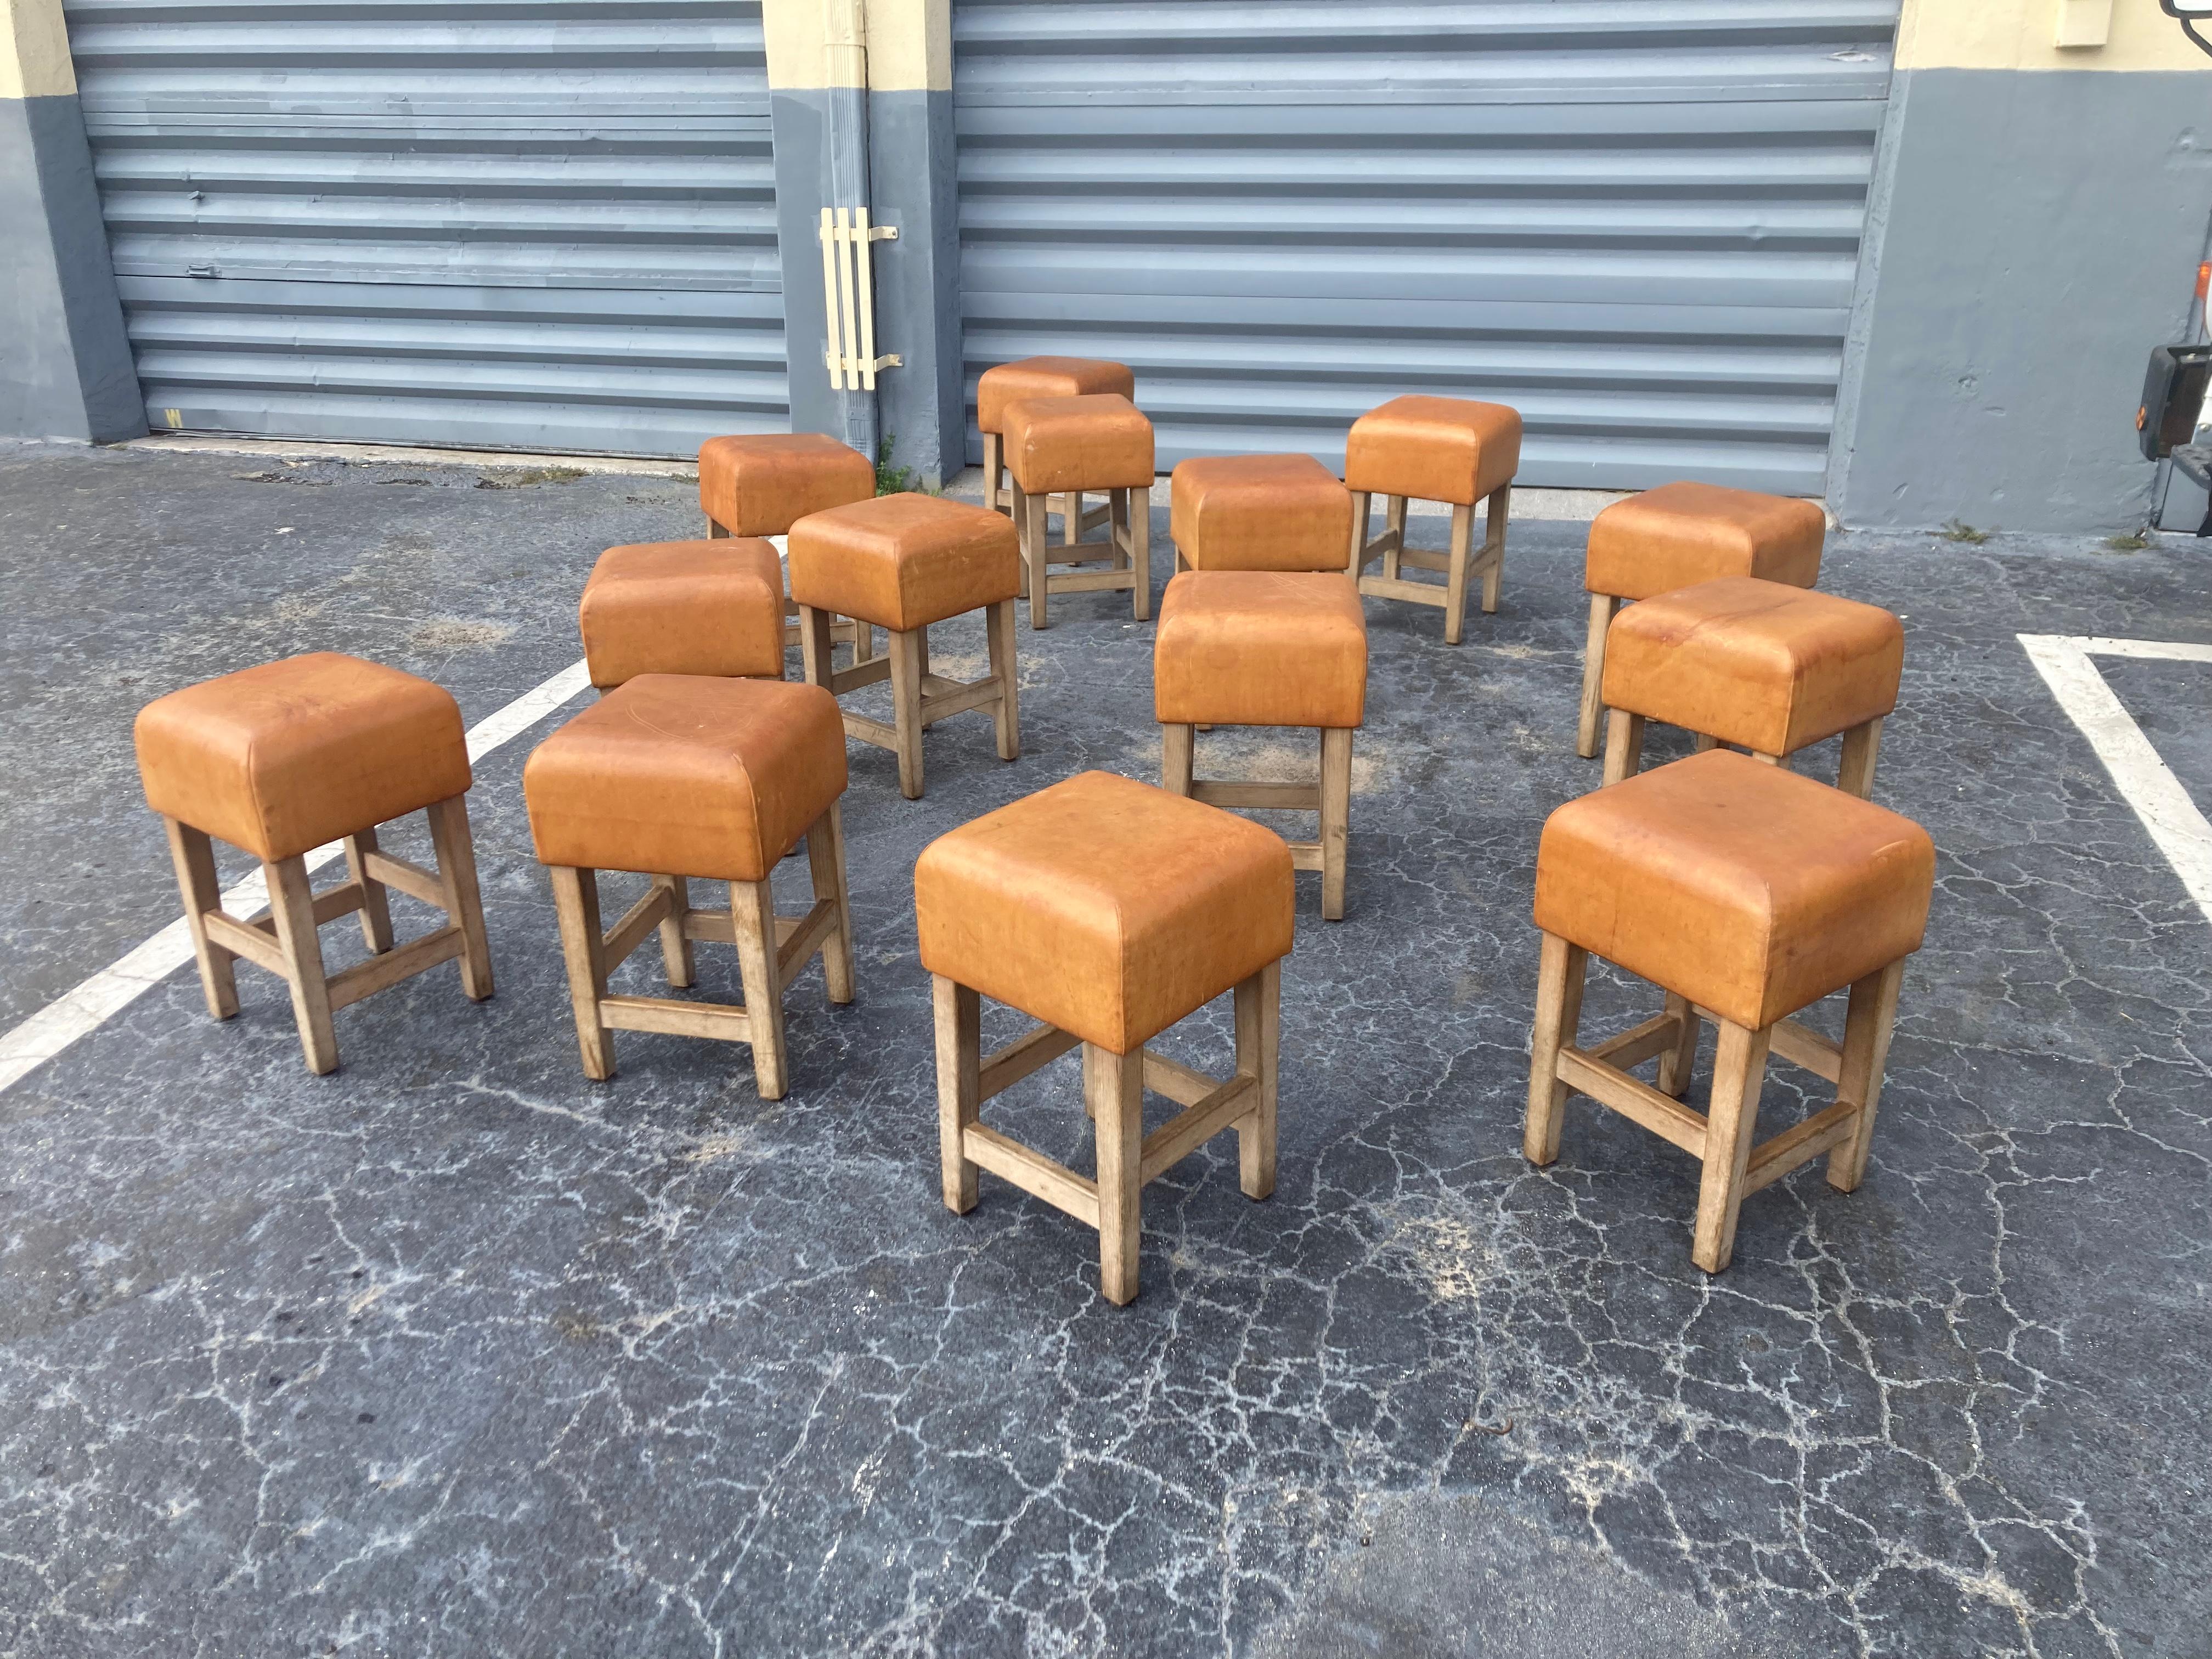 Beautiful and extremely well made stools or chairs, solid oak and beautiful cognac leather. The leather has a strong patina, scratches, nicks and spots. Please see all pictures.
The leather is very thick and the oak construction will last forever.